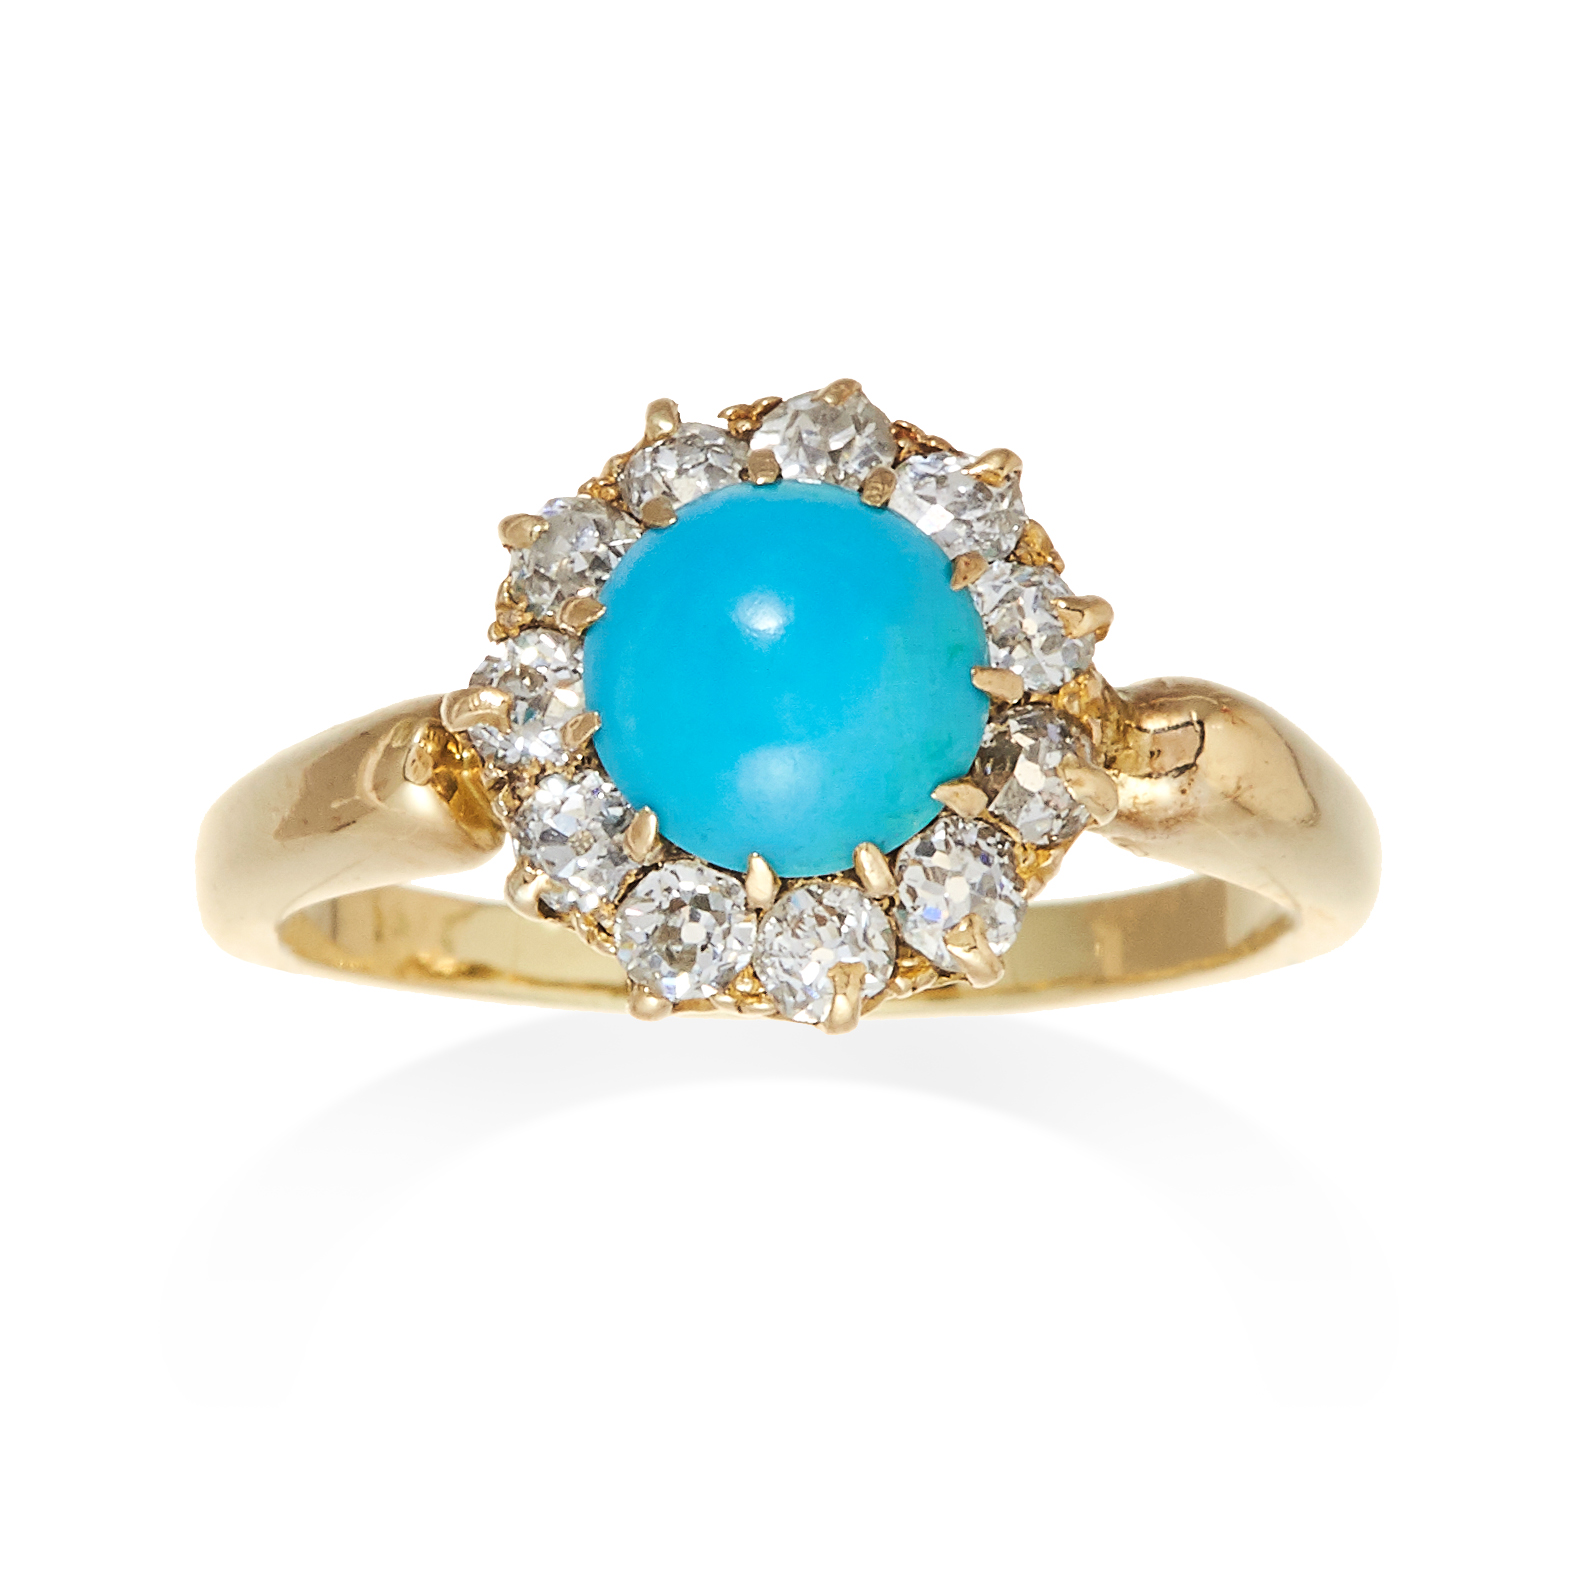 A TURQUOISE AND DIAMOND CLUSTER RING in yellow gold, set with a central cabochon turquoise and